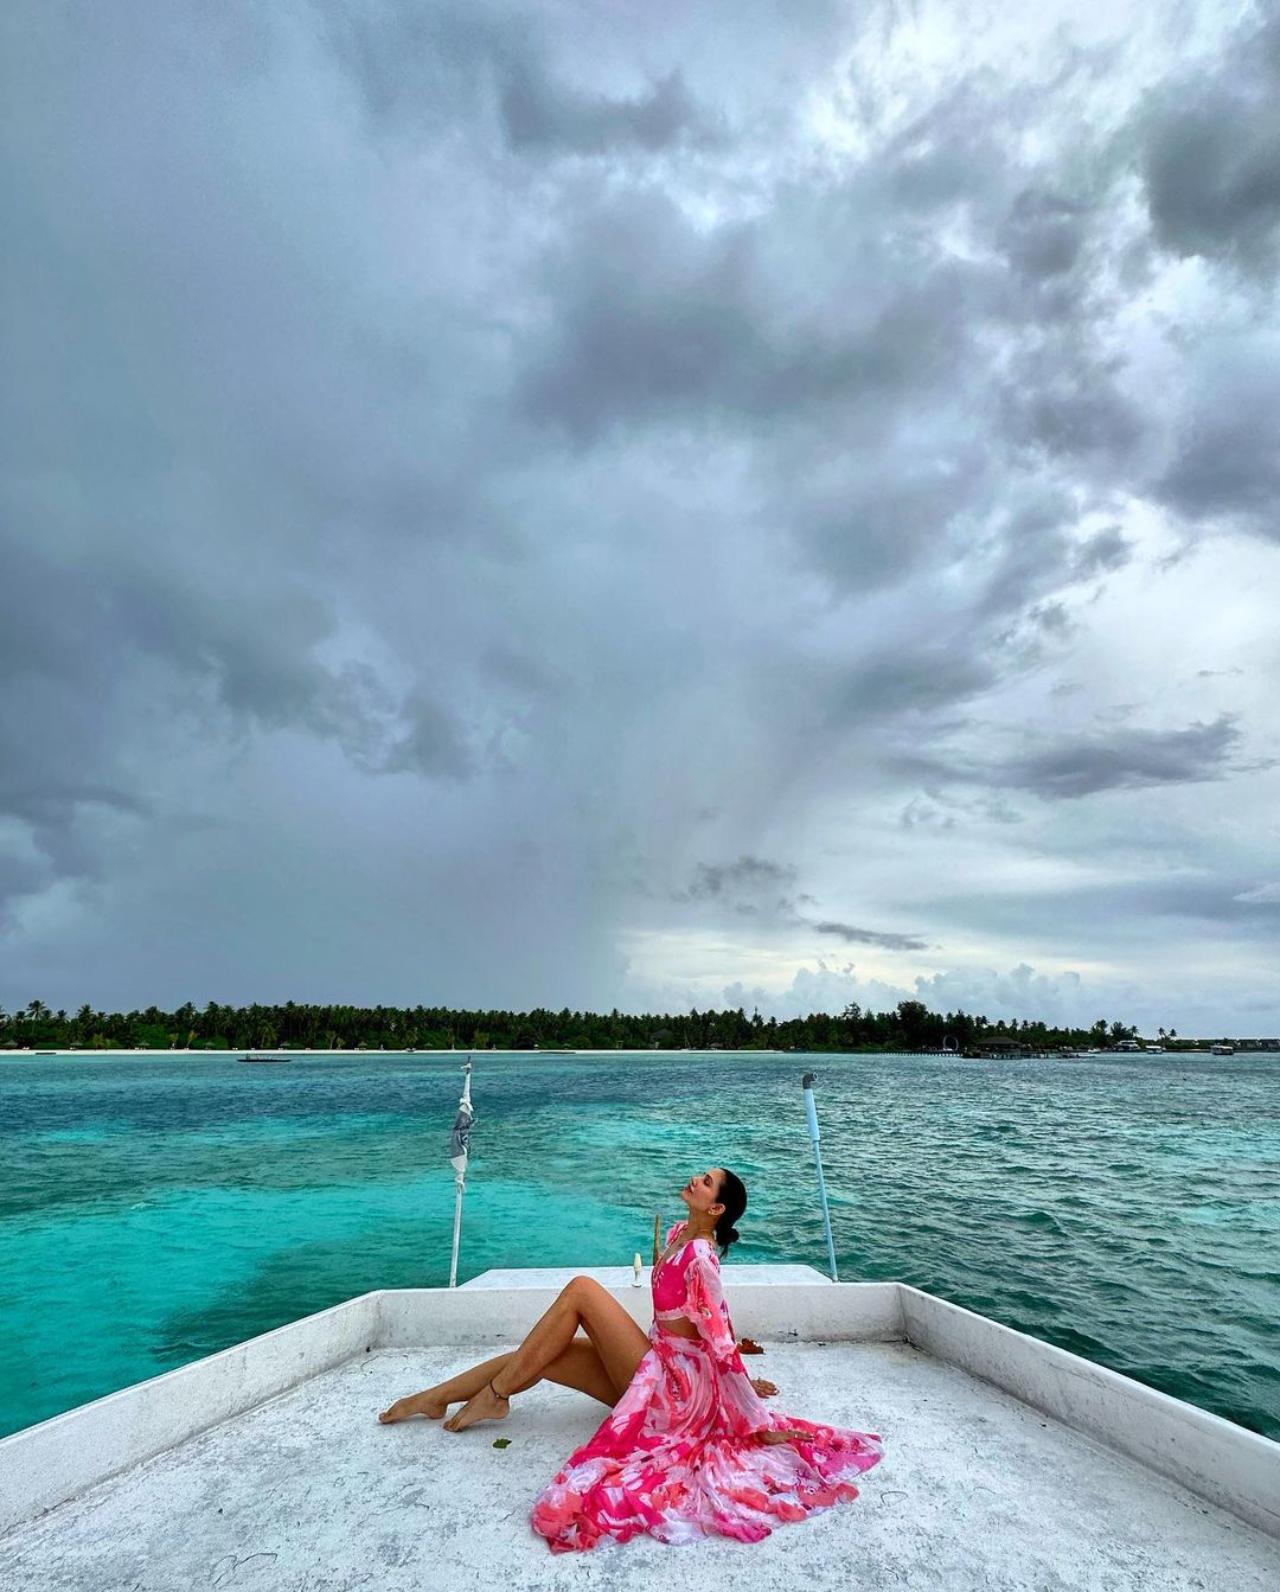 She captioned her photos, “Sunset cruise at @atmospherekanifushi spotting dolphins.” Squint and see if you can spot a dolphin fin in the background!